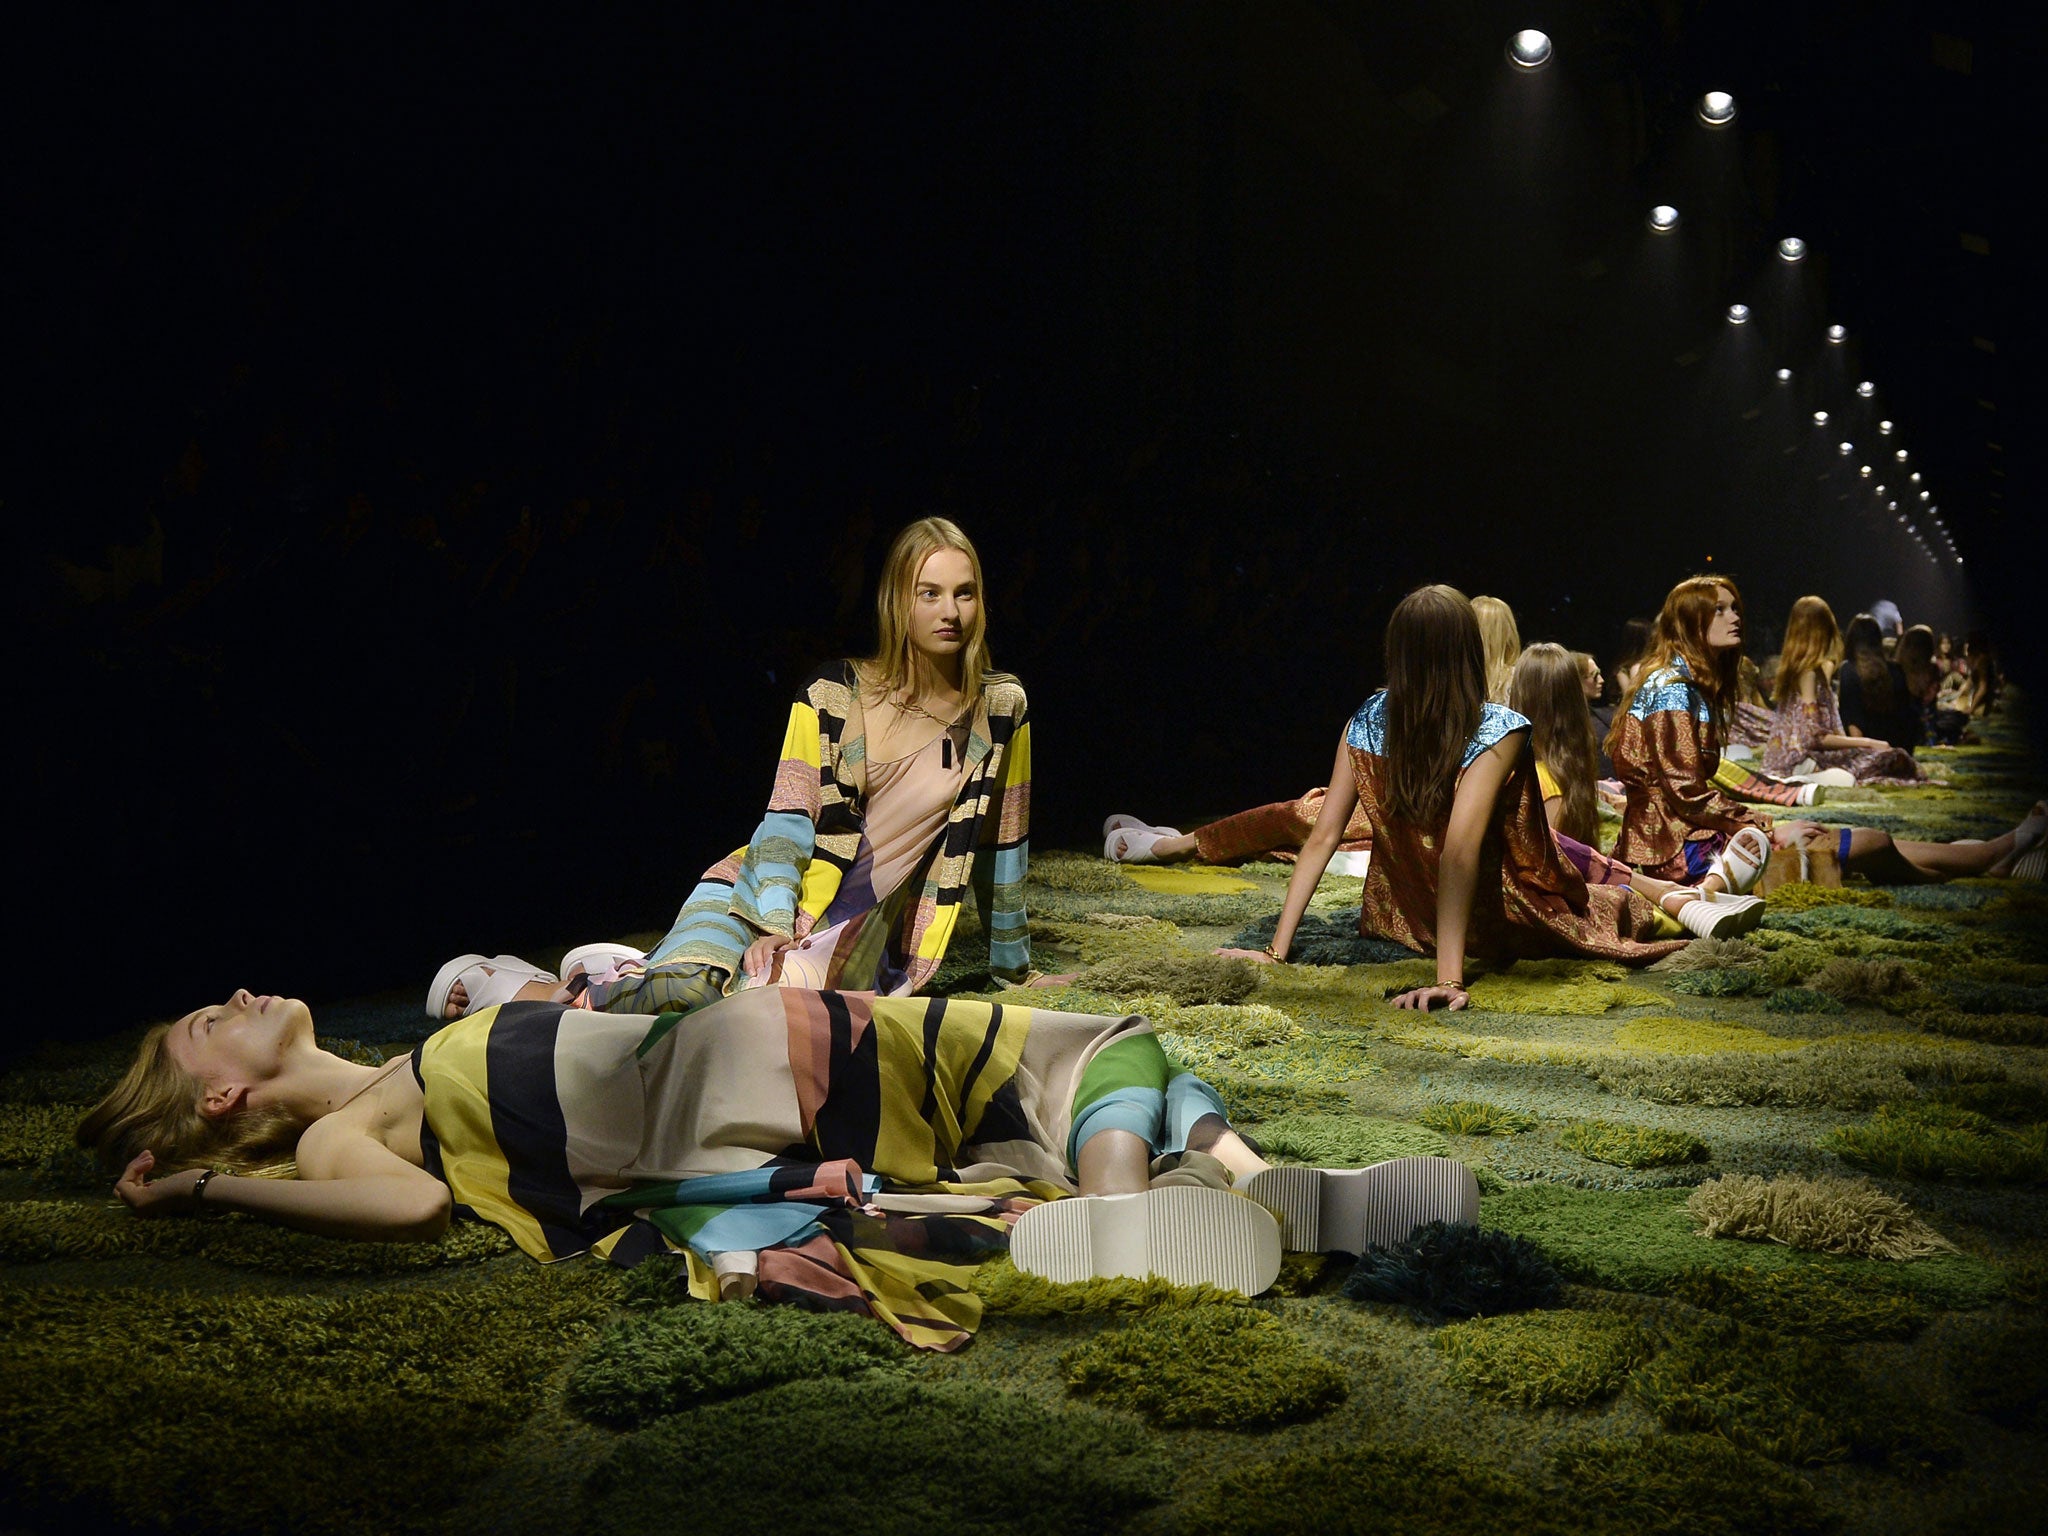 Ophelia the eco-warrior: the finale of Dries Van Noten's 2015 spring/summer show at last September's Paris Fashion Week